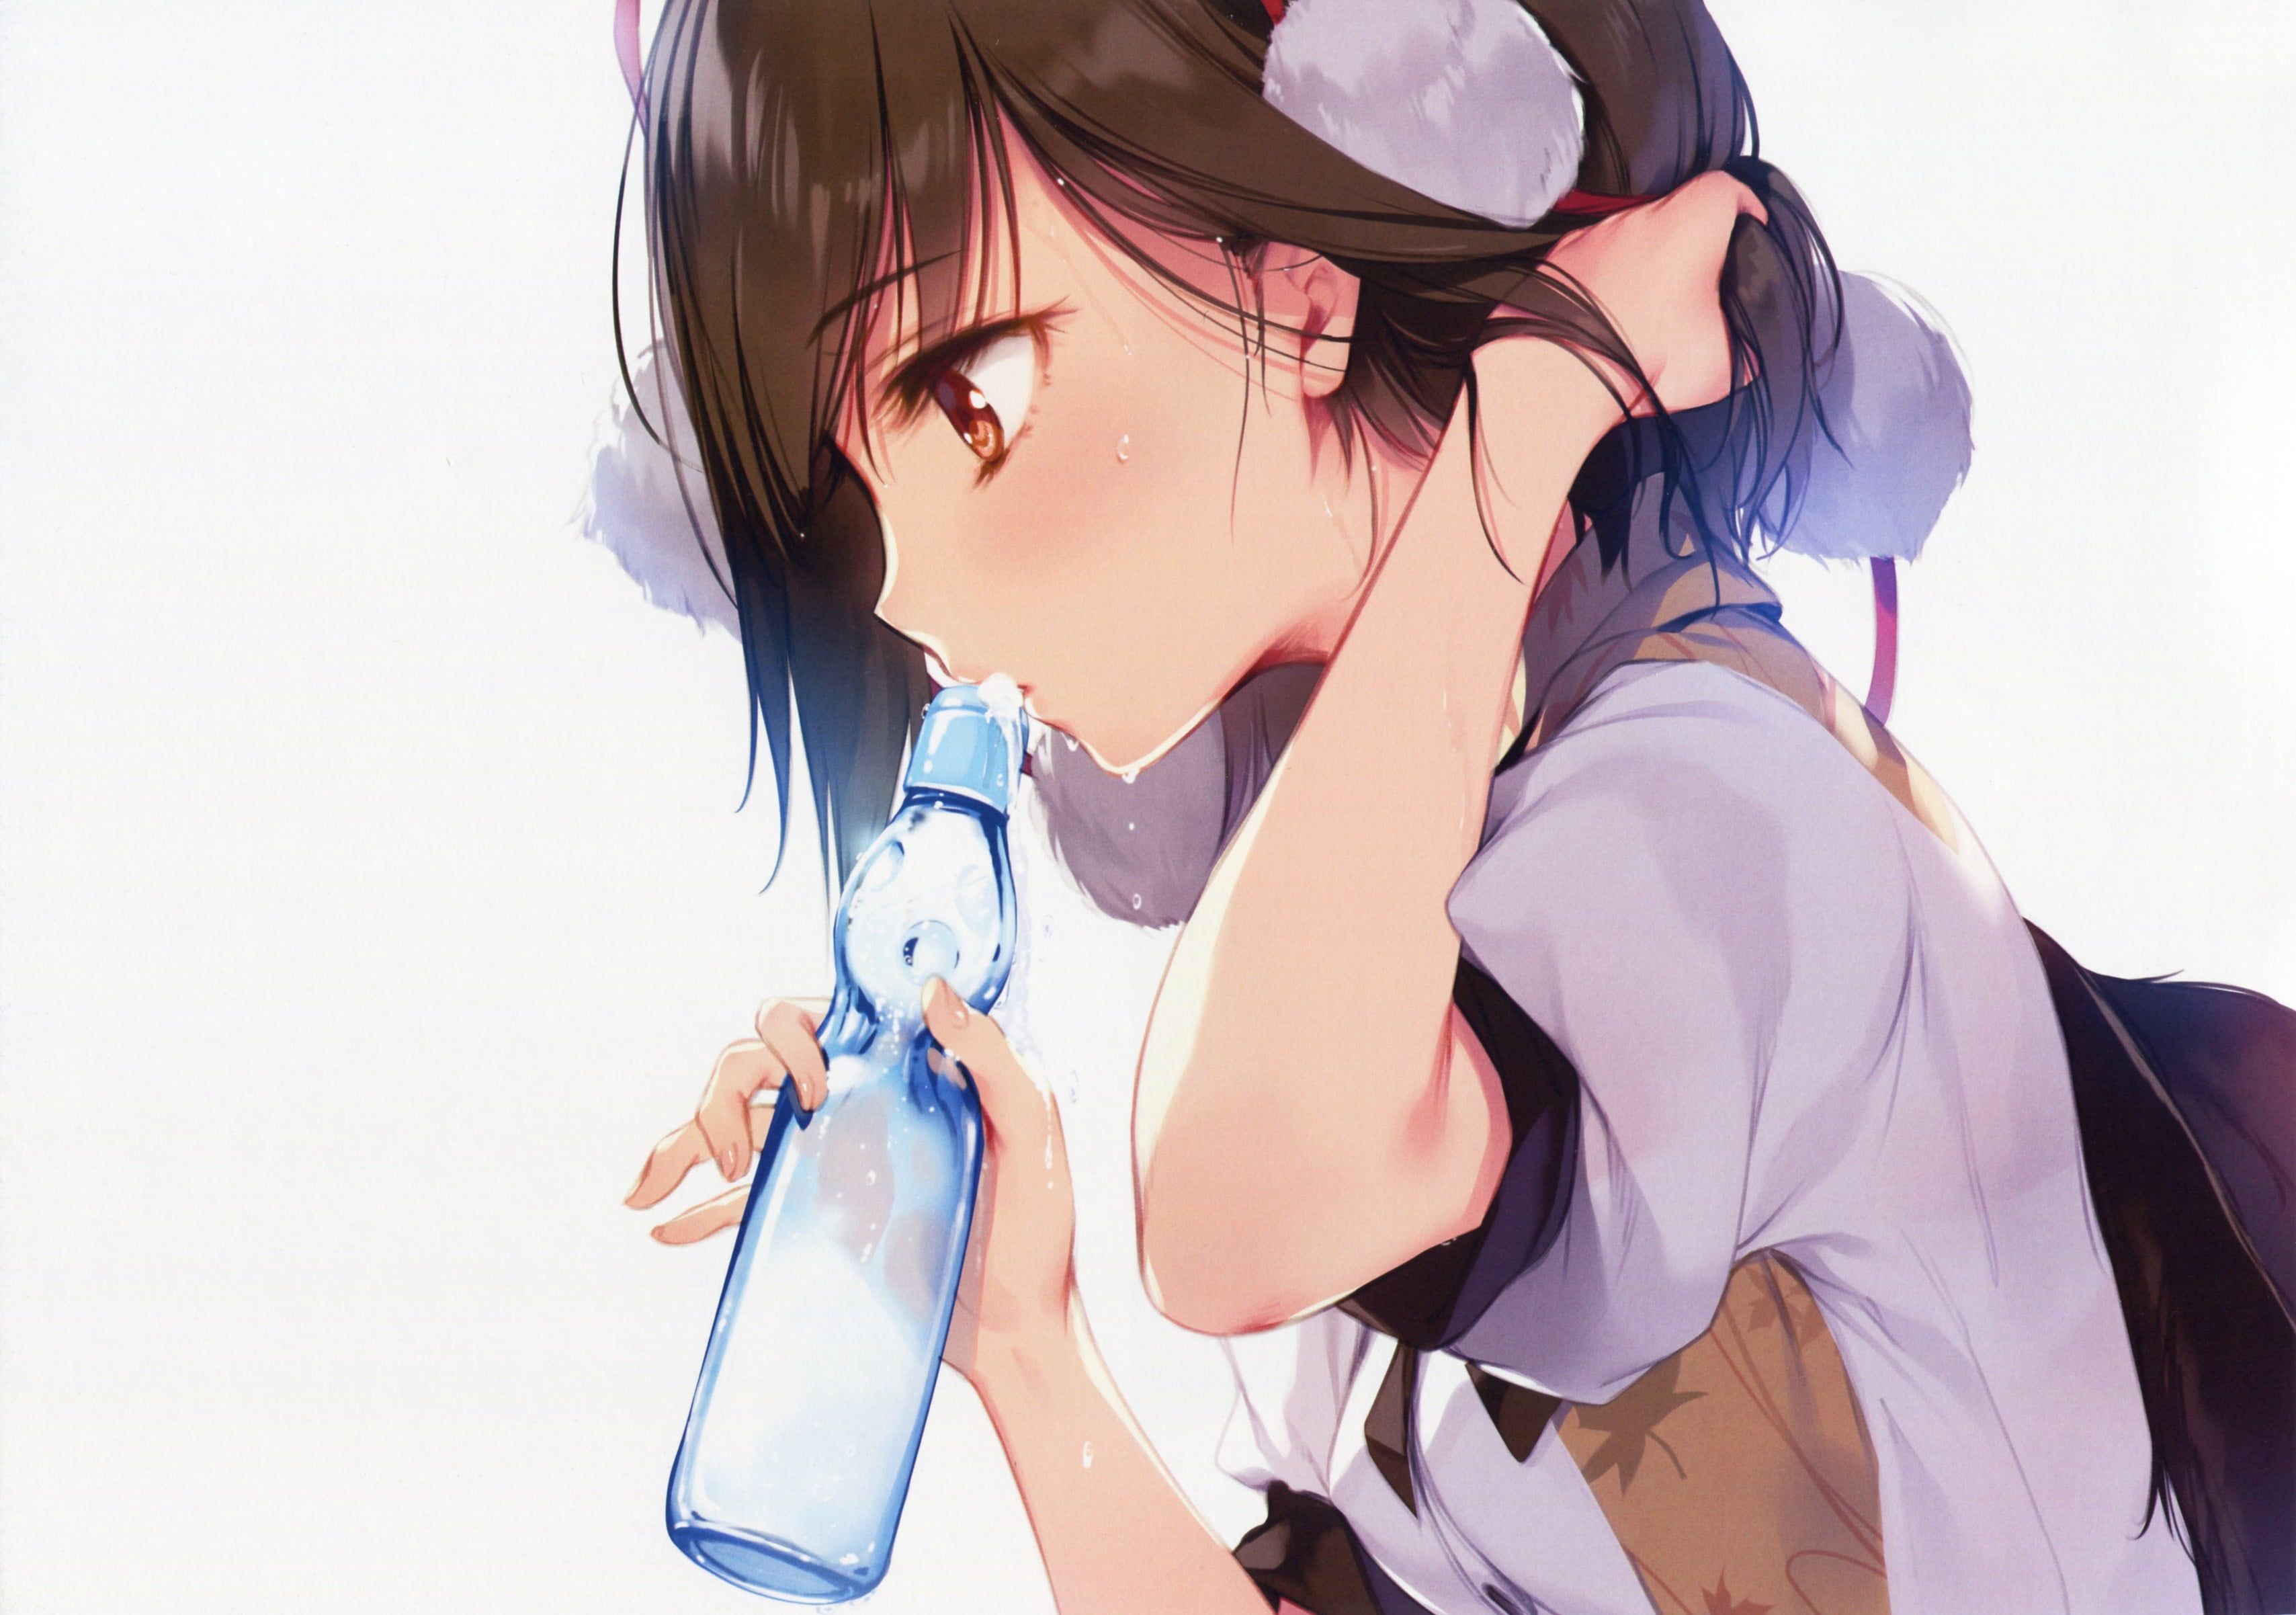 Wallpaper : anime girls, women, closeup, drinking glass, earring, brunette,  hair in face, painted nails, drink, alcohol, red eyes 1900x1313 -  WallpaperManiac - 2146937 - HD Wallpapers - WallHere